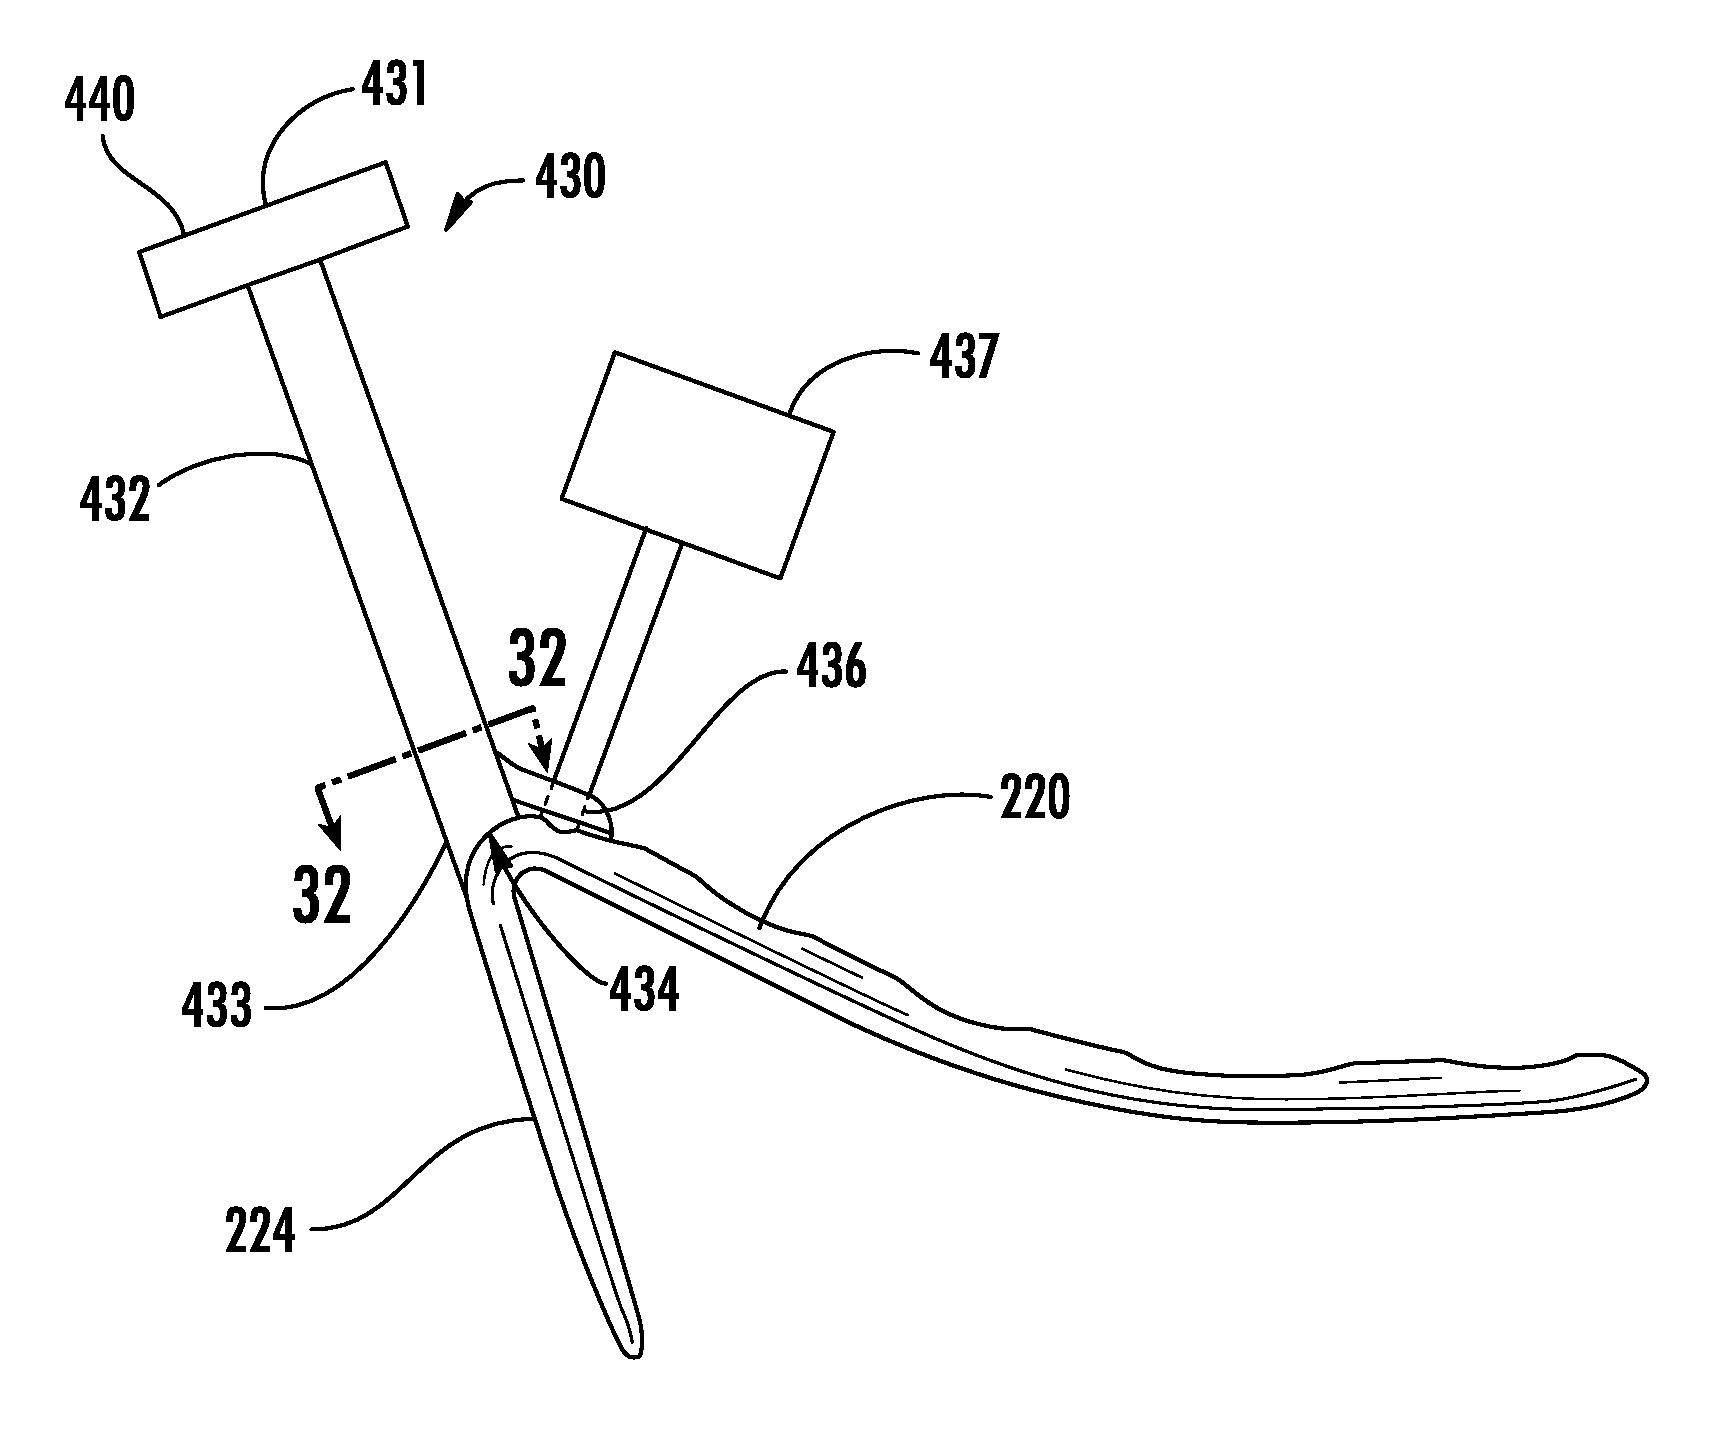 Holder/impactor for contoured bone plate for fracture fixation